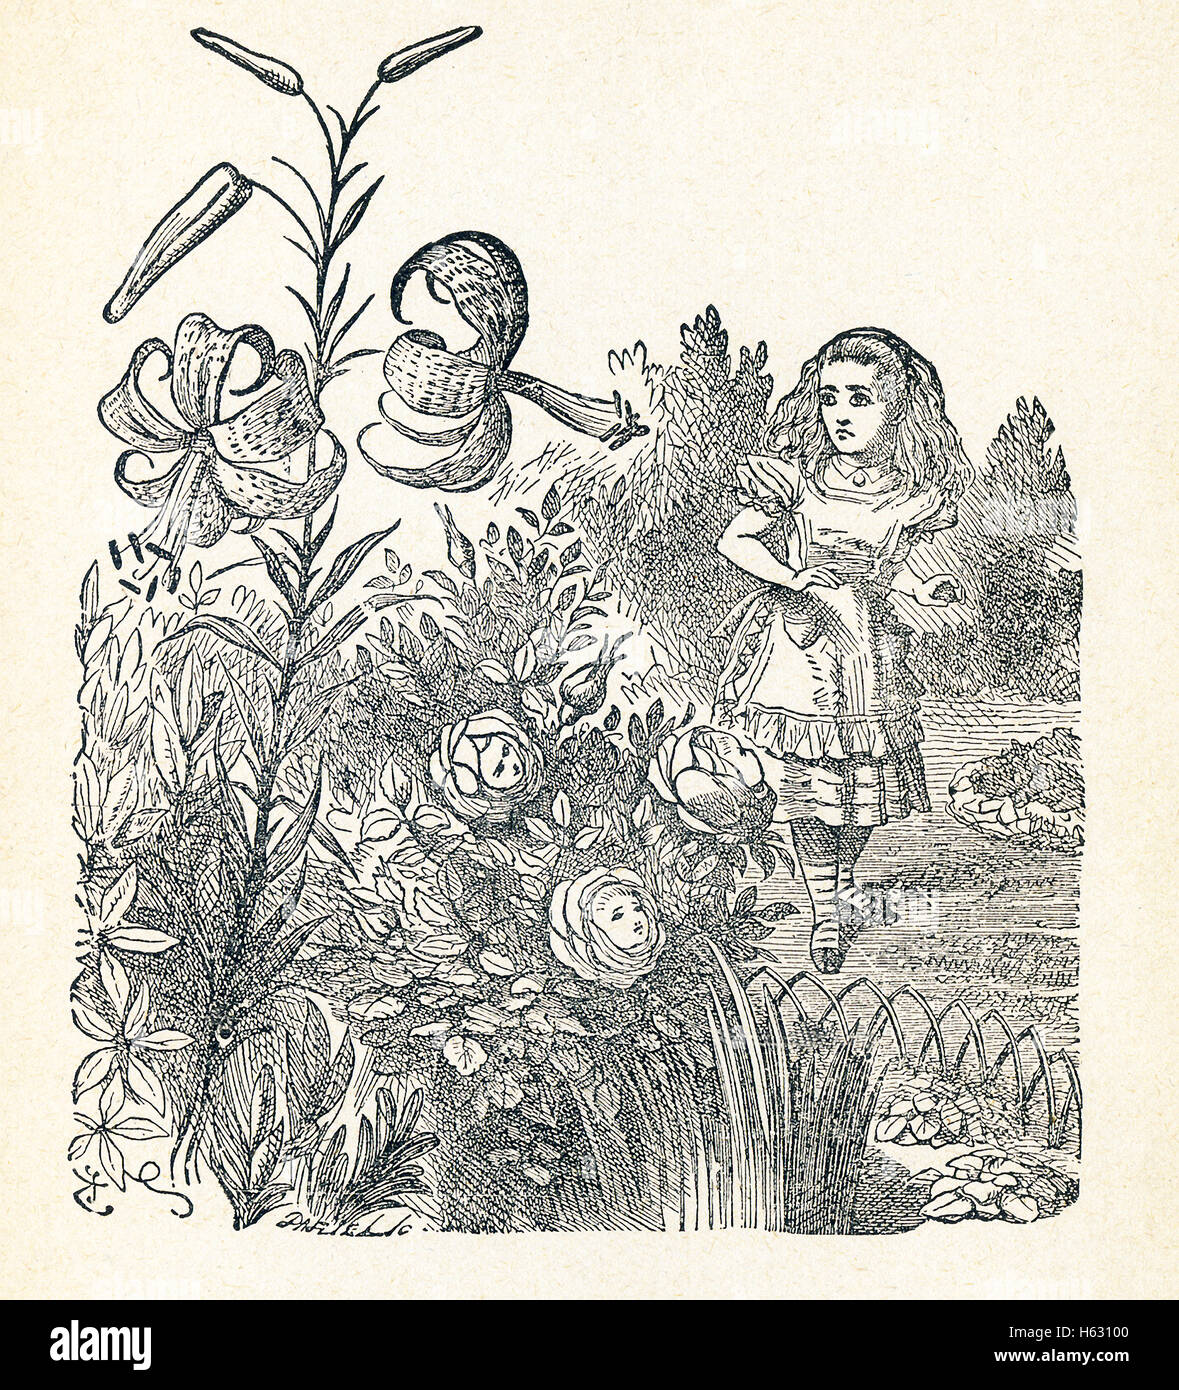 This is a scene from what Alice saw once she went through the Looking Glass and into the Looking Glass room in Lewis Carroll's 'Through the Looking Glass.' Here Alice is in the Garden of Live Flowers. You can see tiger-lilys and daisies. Stock Photo